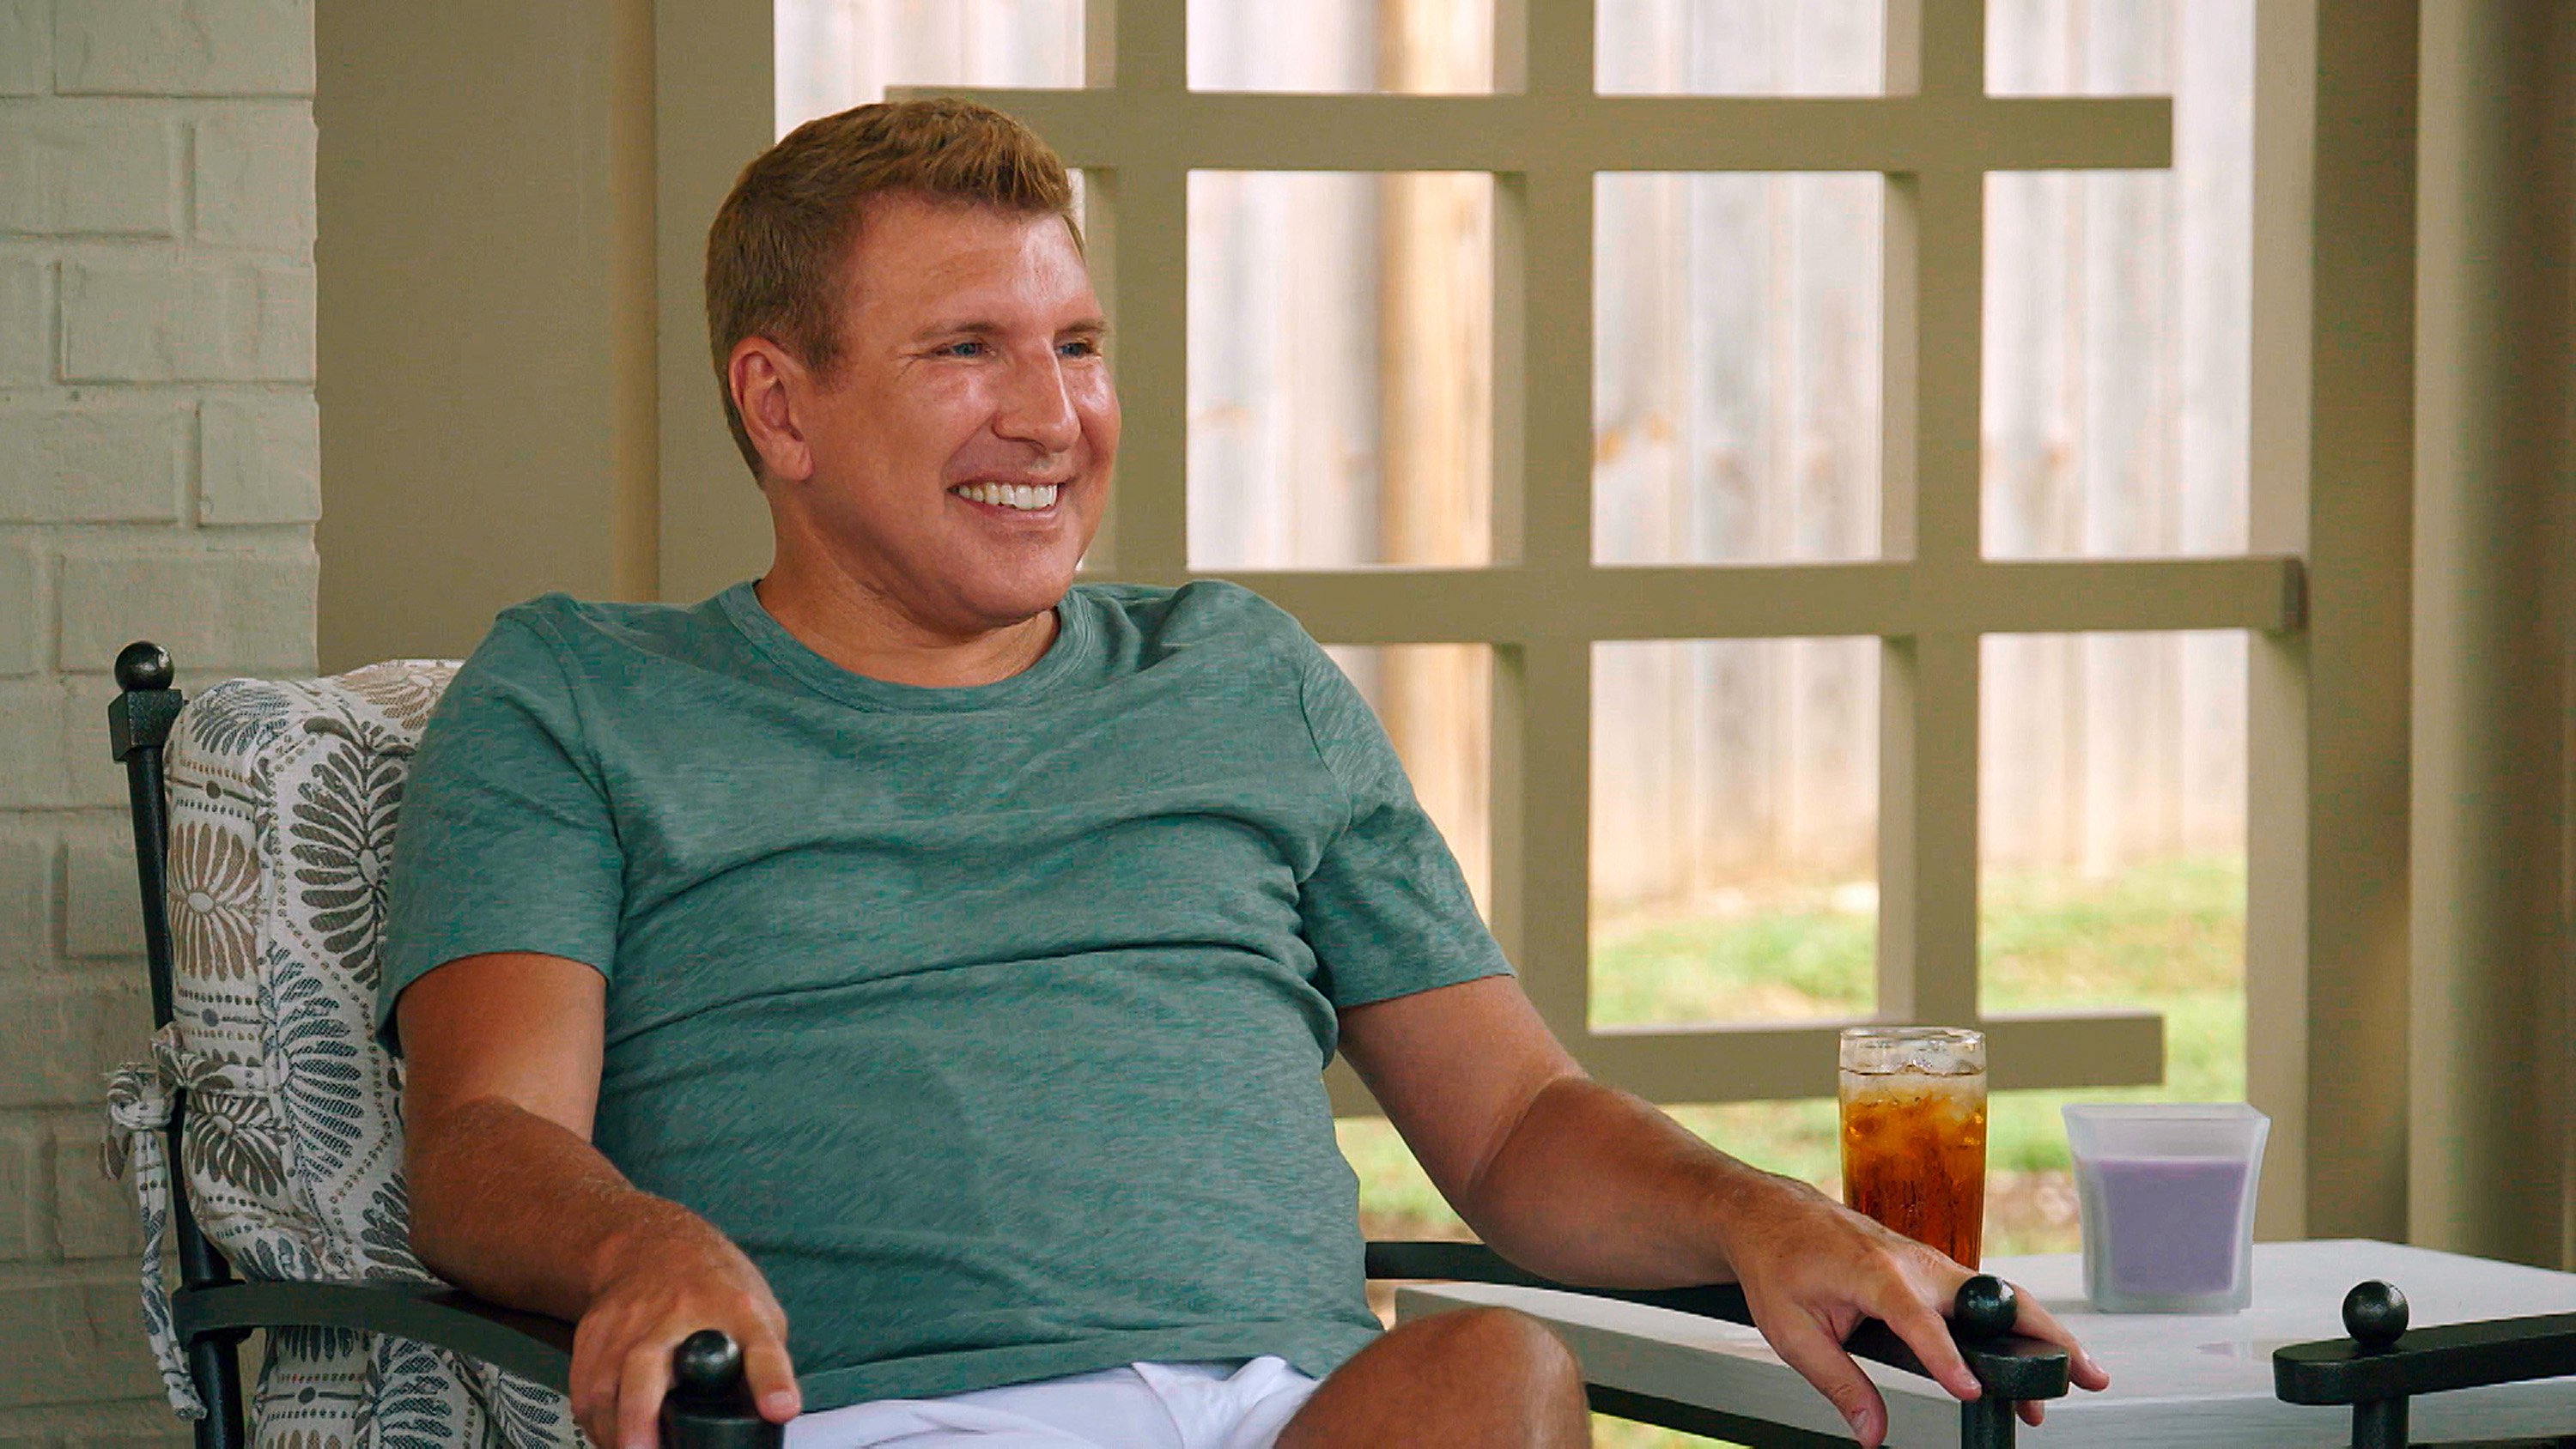 Todd Chrisley smiling and wearing a blue T-shirt on 'Chrisley Knows Best'